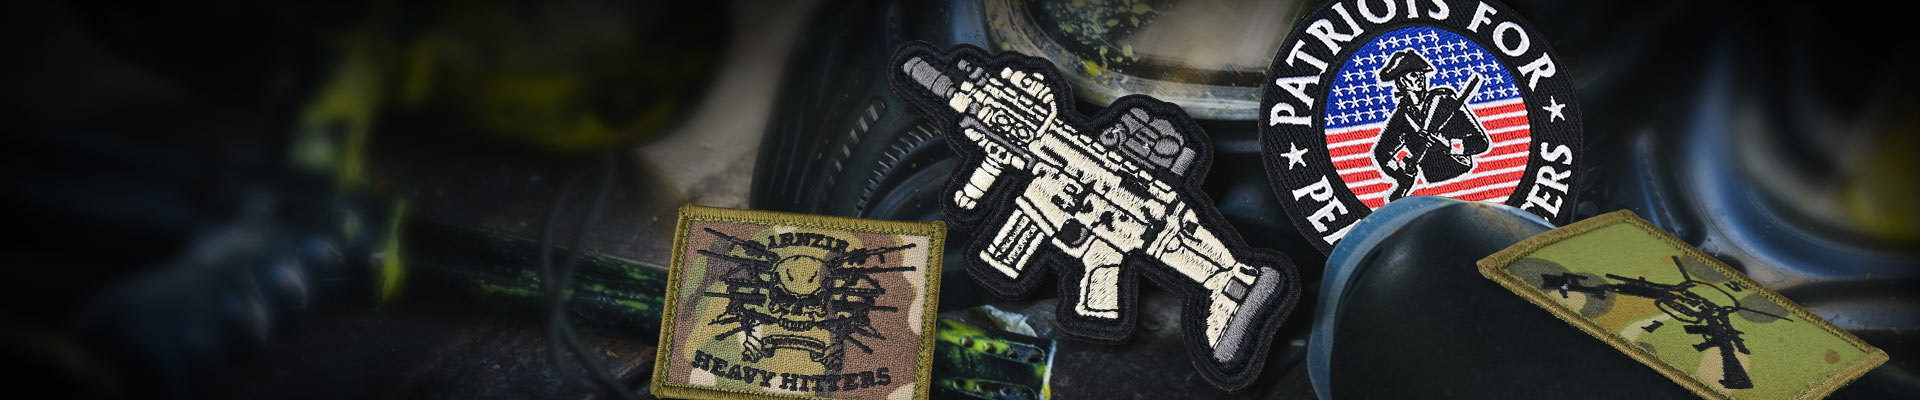 Aangepaste Airsoft-patches